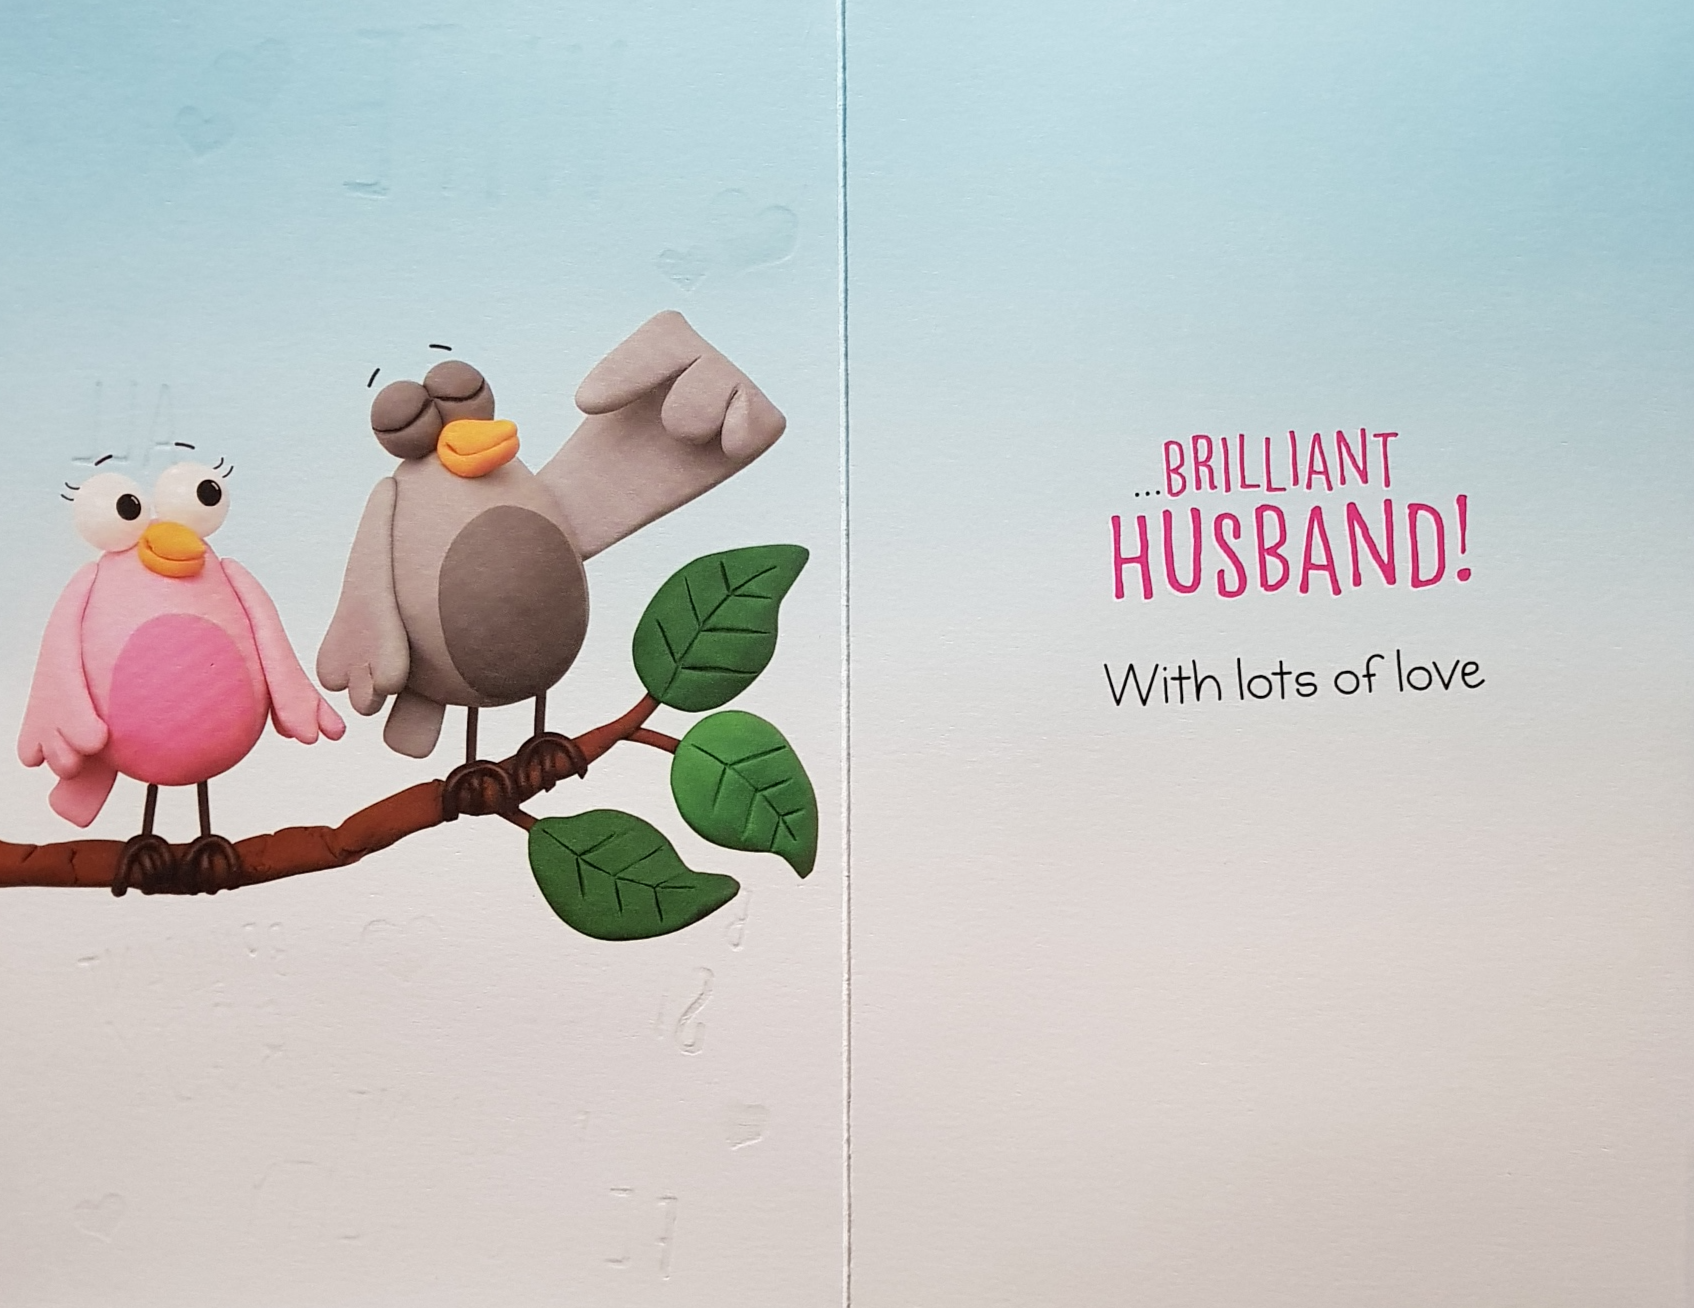 Anniversary Card - Wife / Two Cute Love Birds On A Branch